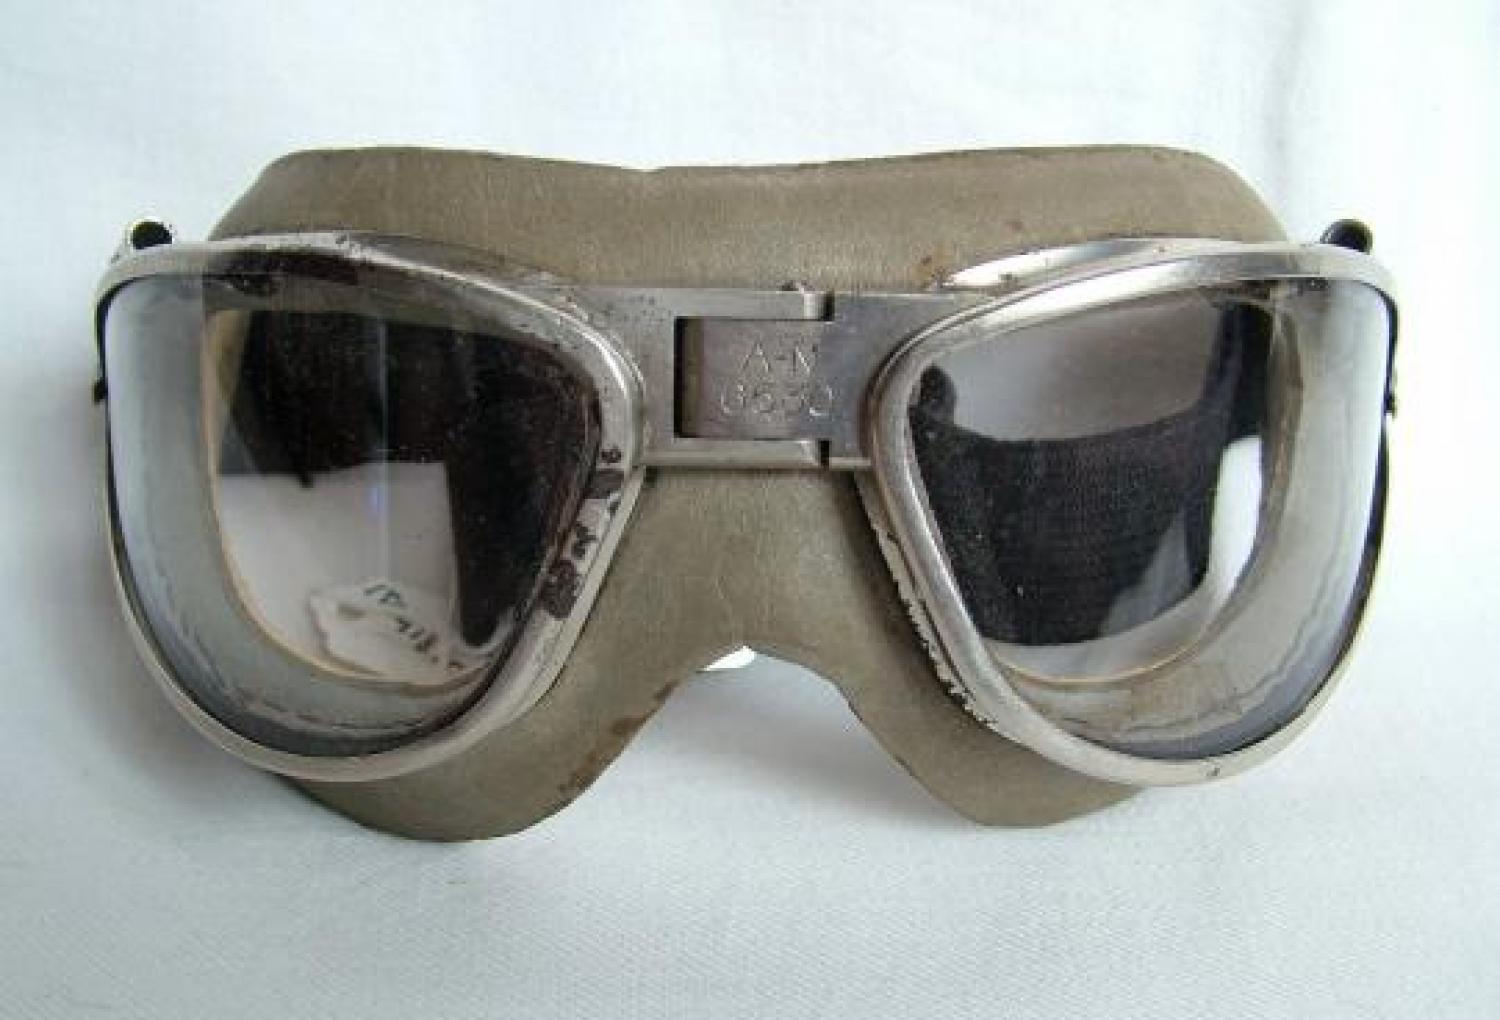 USAAF AN6530 Flying Goggles